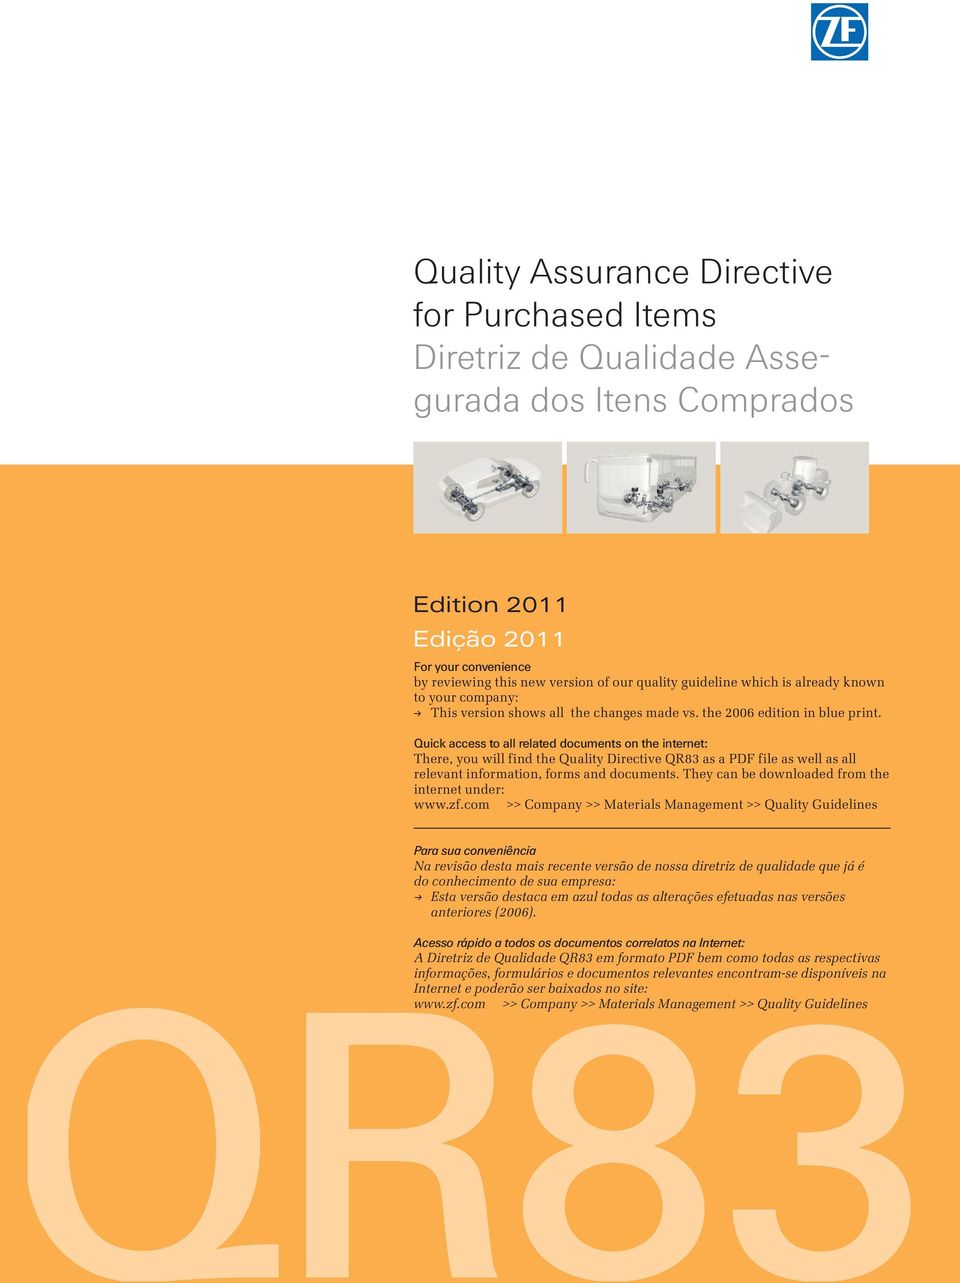 Quick access to all related documents on the internet: There, you will find the Quality Directive QR83 as a PDF file as well as all relevant information, forms and documents.